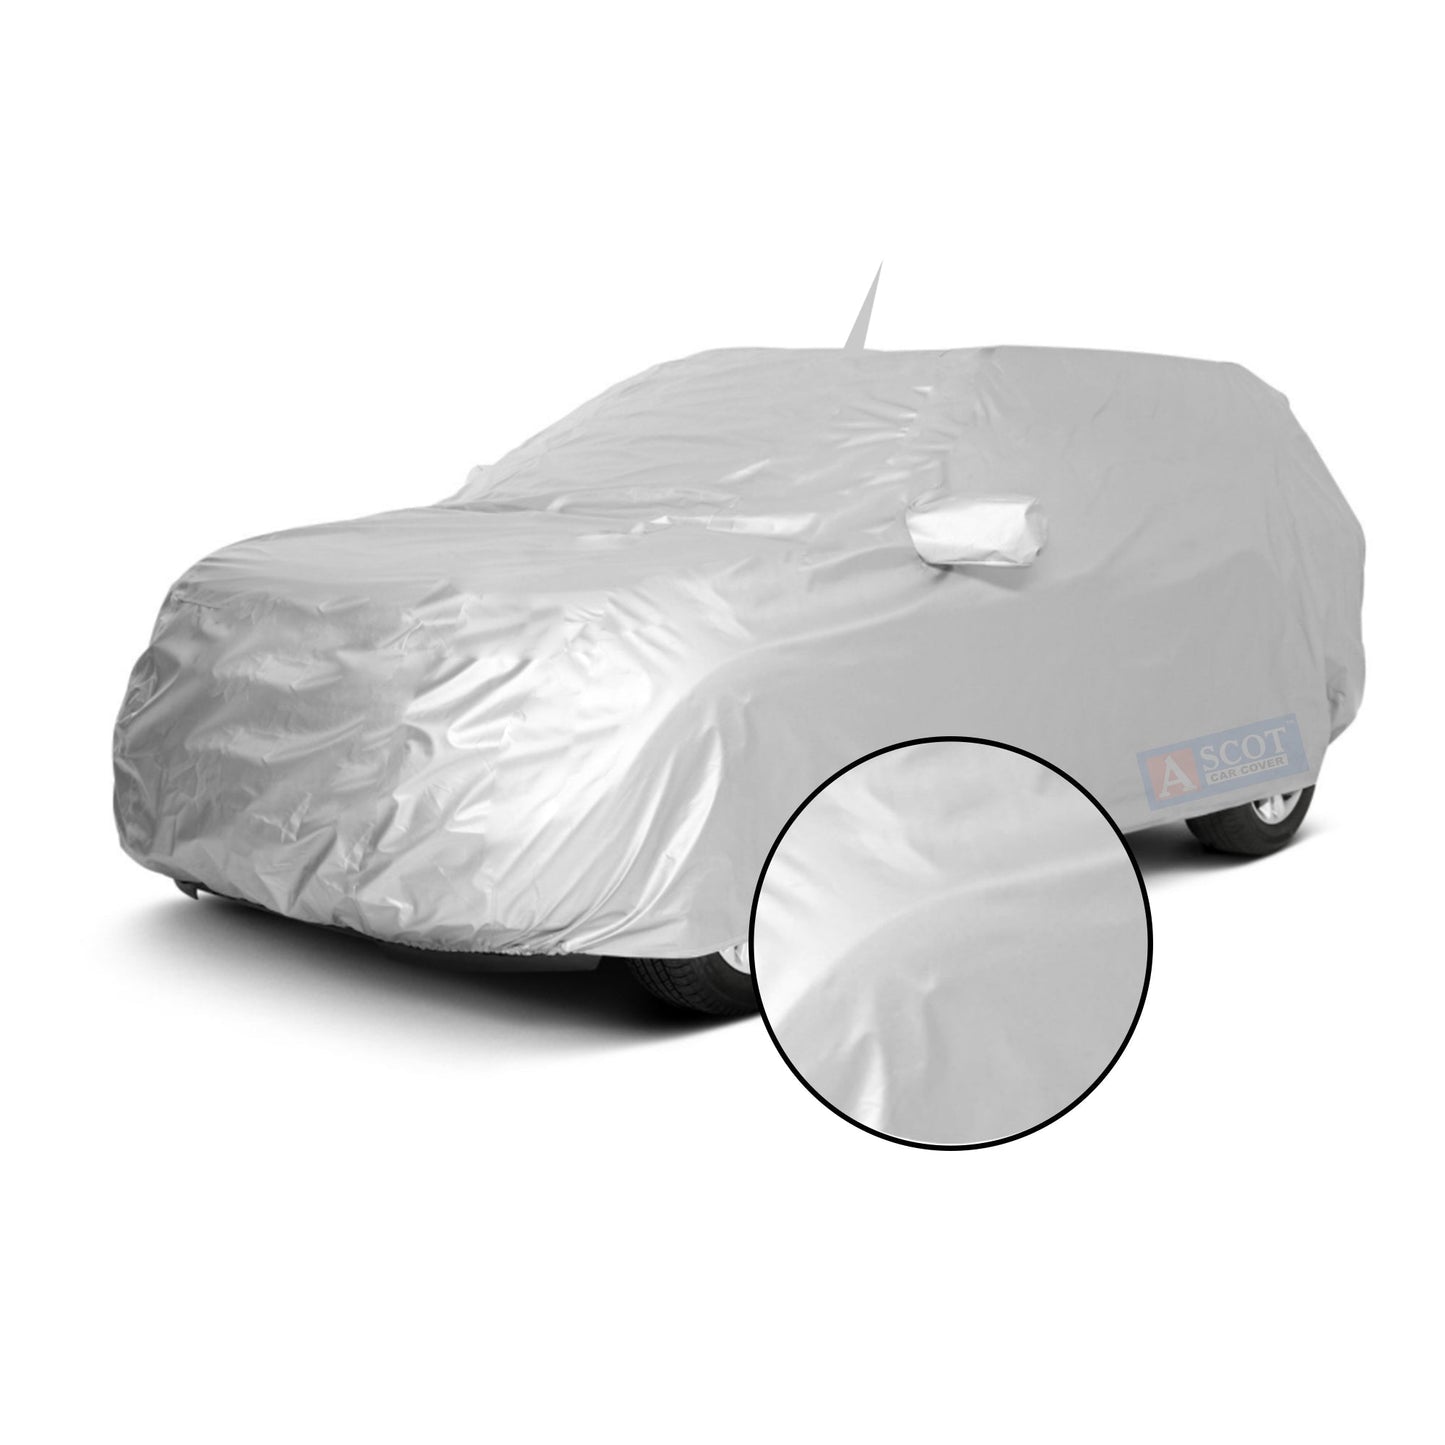 Ascot BMW M5 2011-2016 Model Car Body Cover Dust Proof, Trippel Stitched